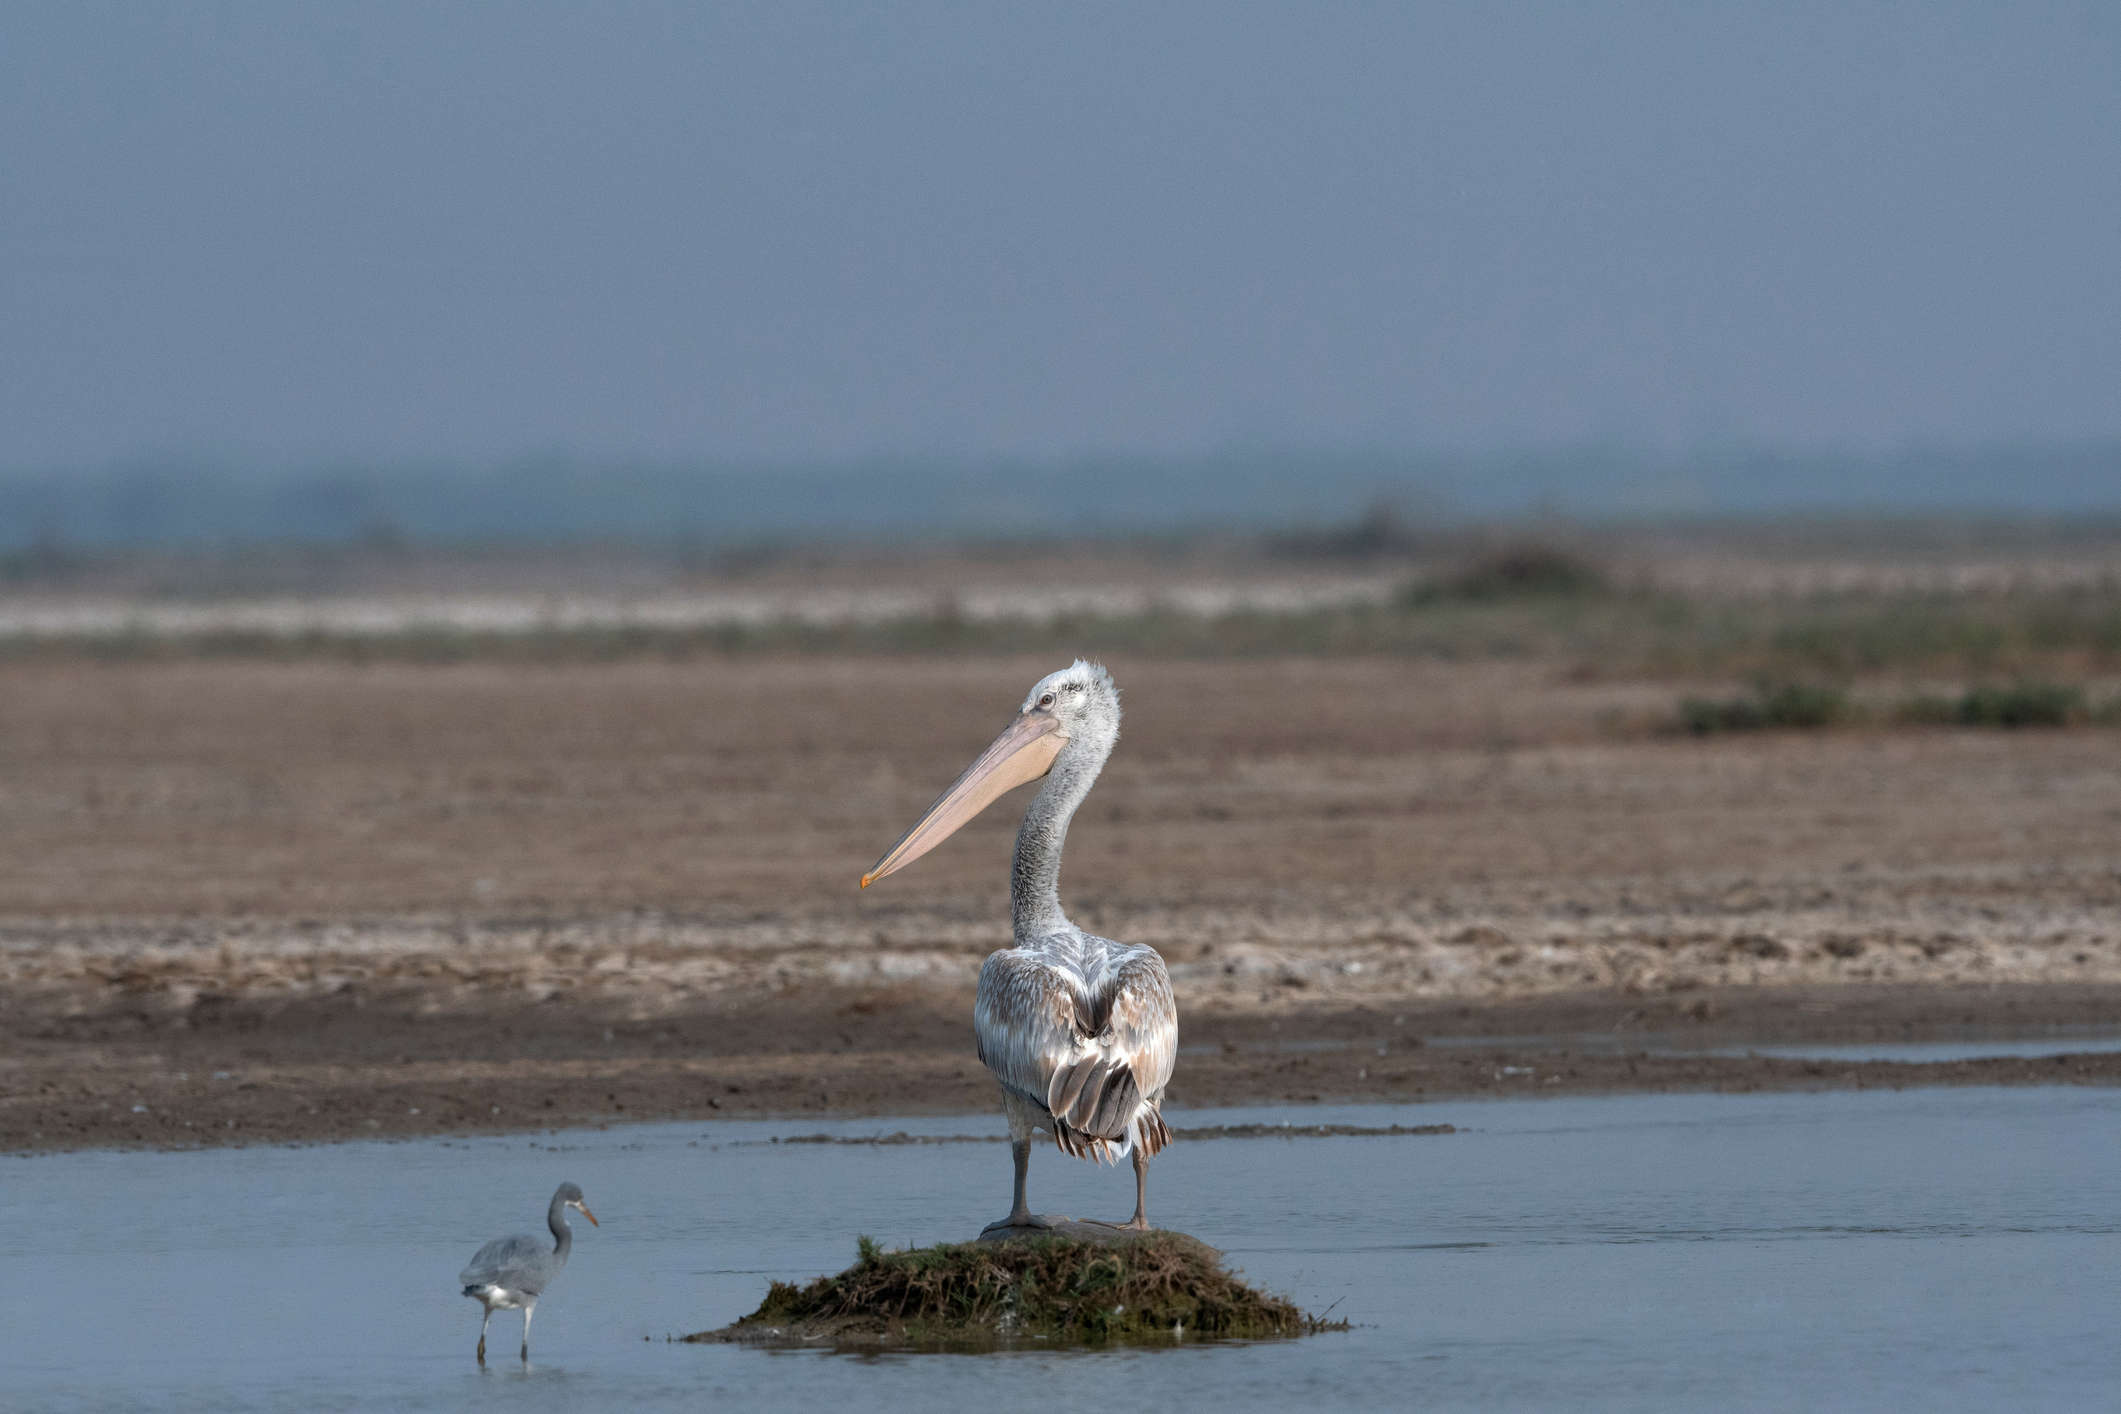 Dalmatian Pelicans make a trip Rajasthan’s Jaisalmer for the first time